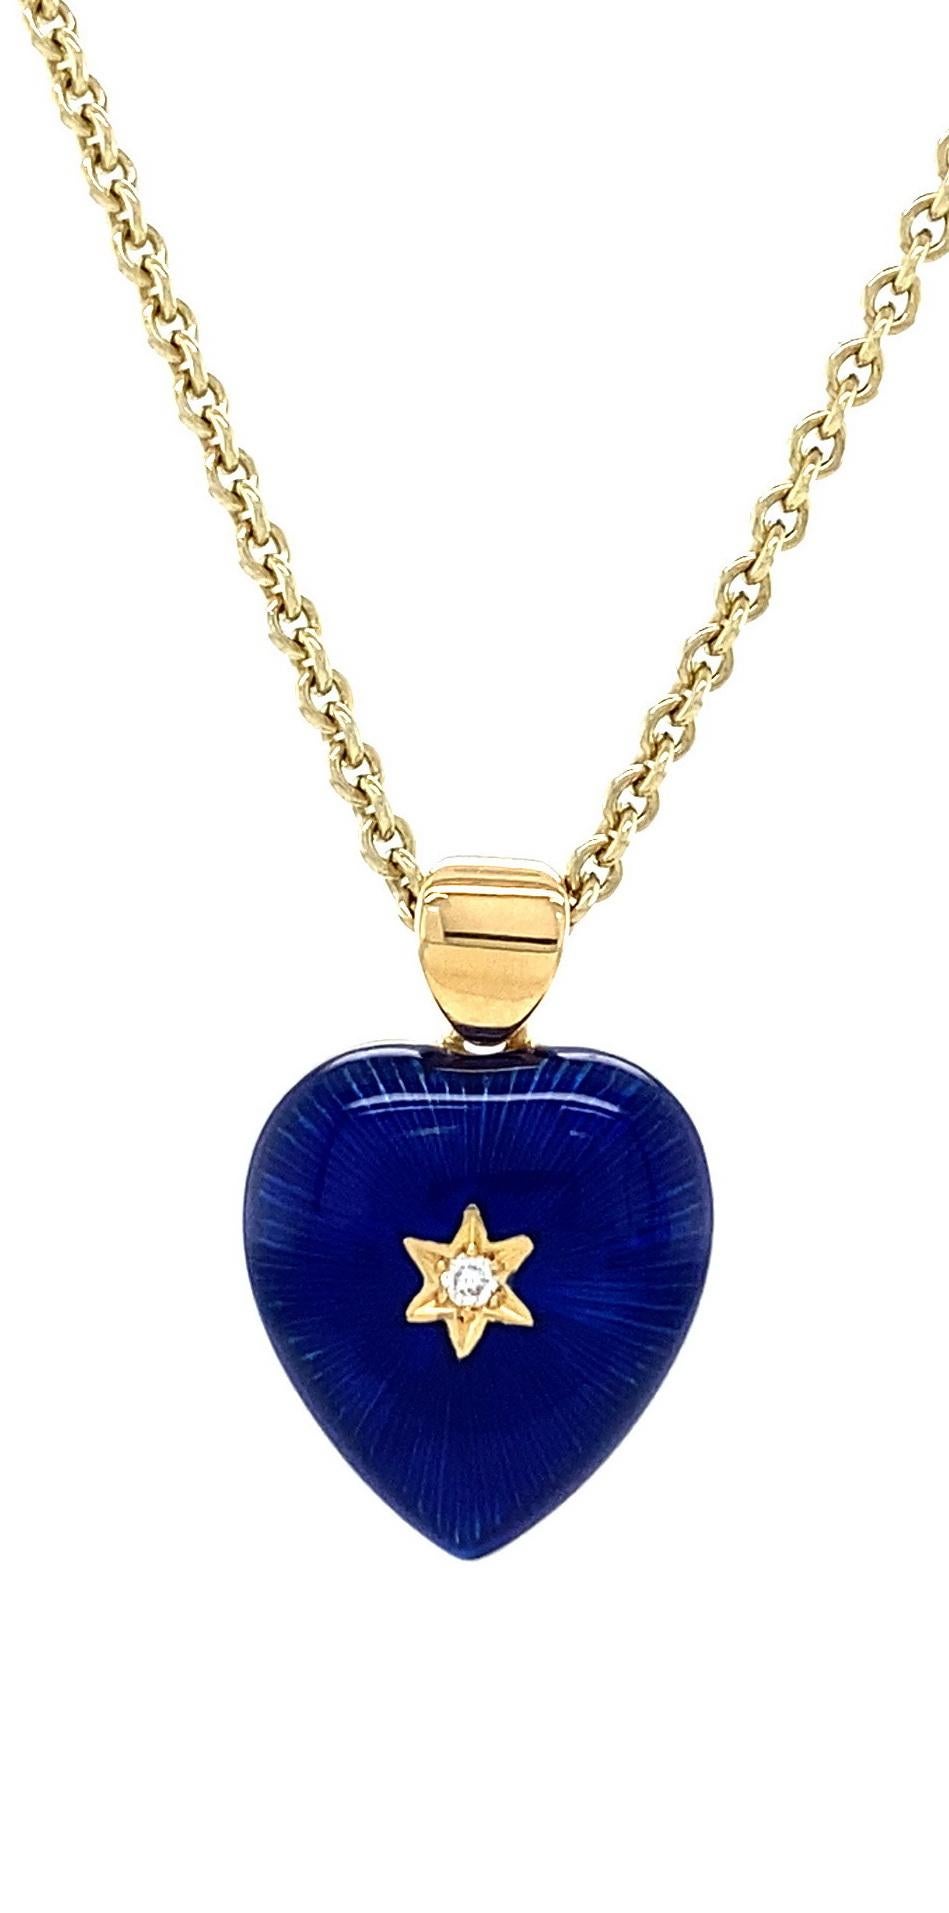 Victor Mayer heart shaped two colored pendant necklace 18k yellow gold, dark blue, yellow vitreous enamel, 2 diamonds, total 2.02 ct, G VS, measurements app. 11.8 mm x 13.0 mm

About the creator Victor Mayer
Victor Mayer is internationally renowned